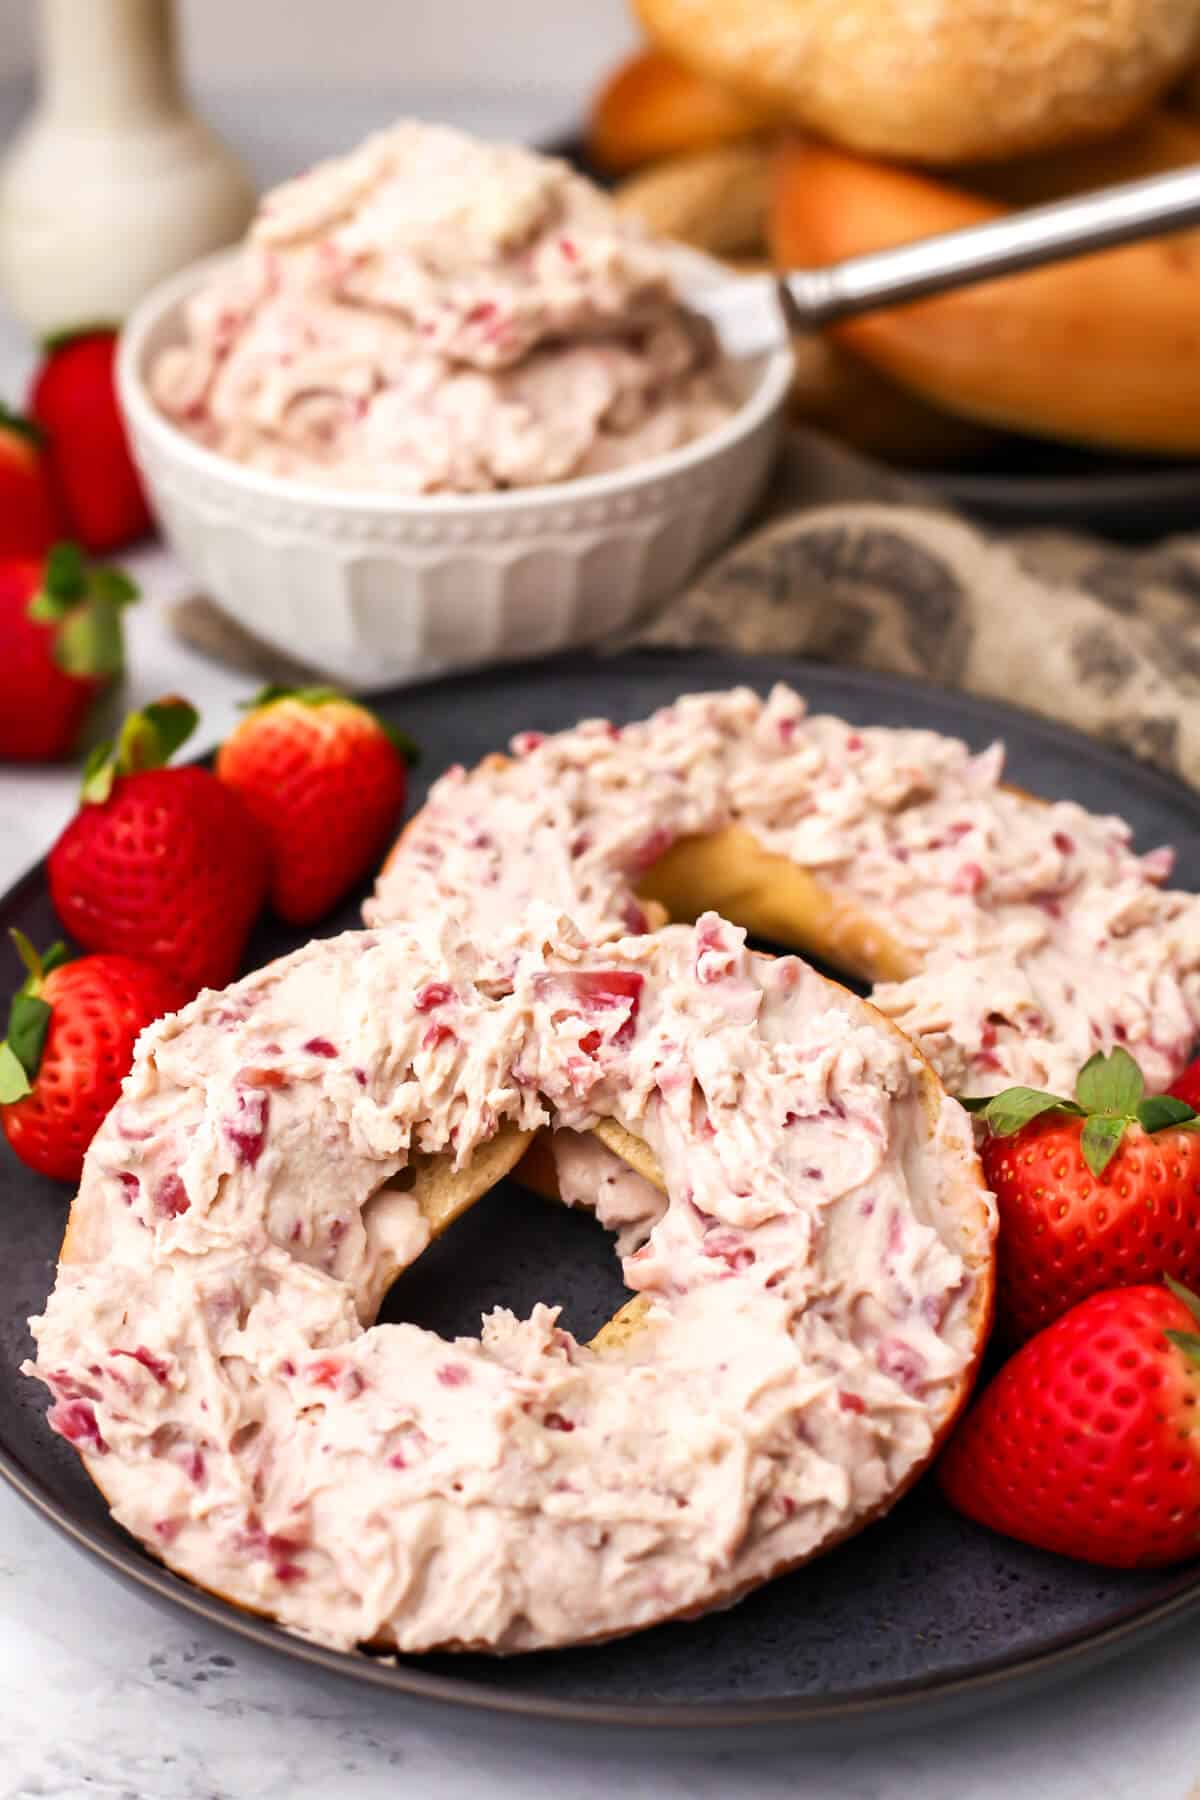 A bagel with vegan strawberry cream cheese and fresh strawberries on the side with more bagels behind it.